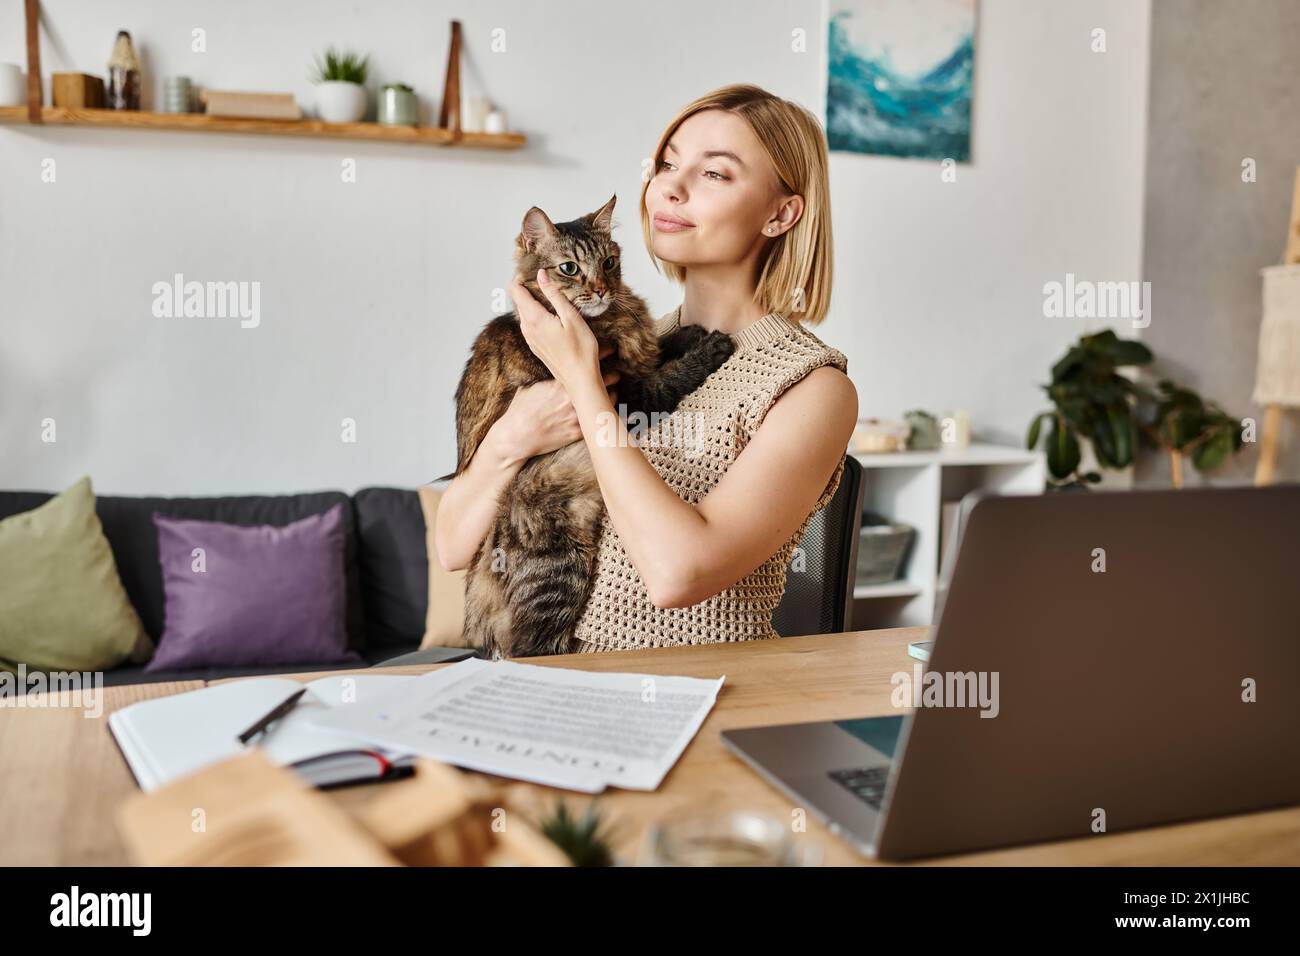 A serene woman with short hair sitting at a table, gently holding a cat in her arms at home. Stock Photo